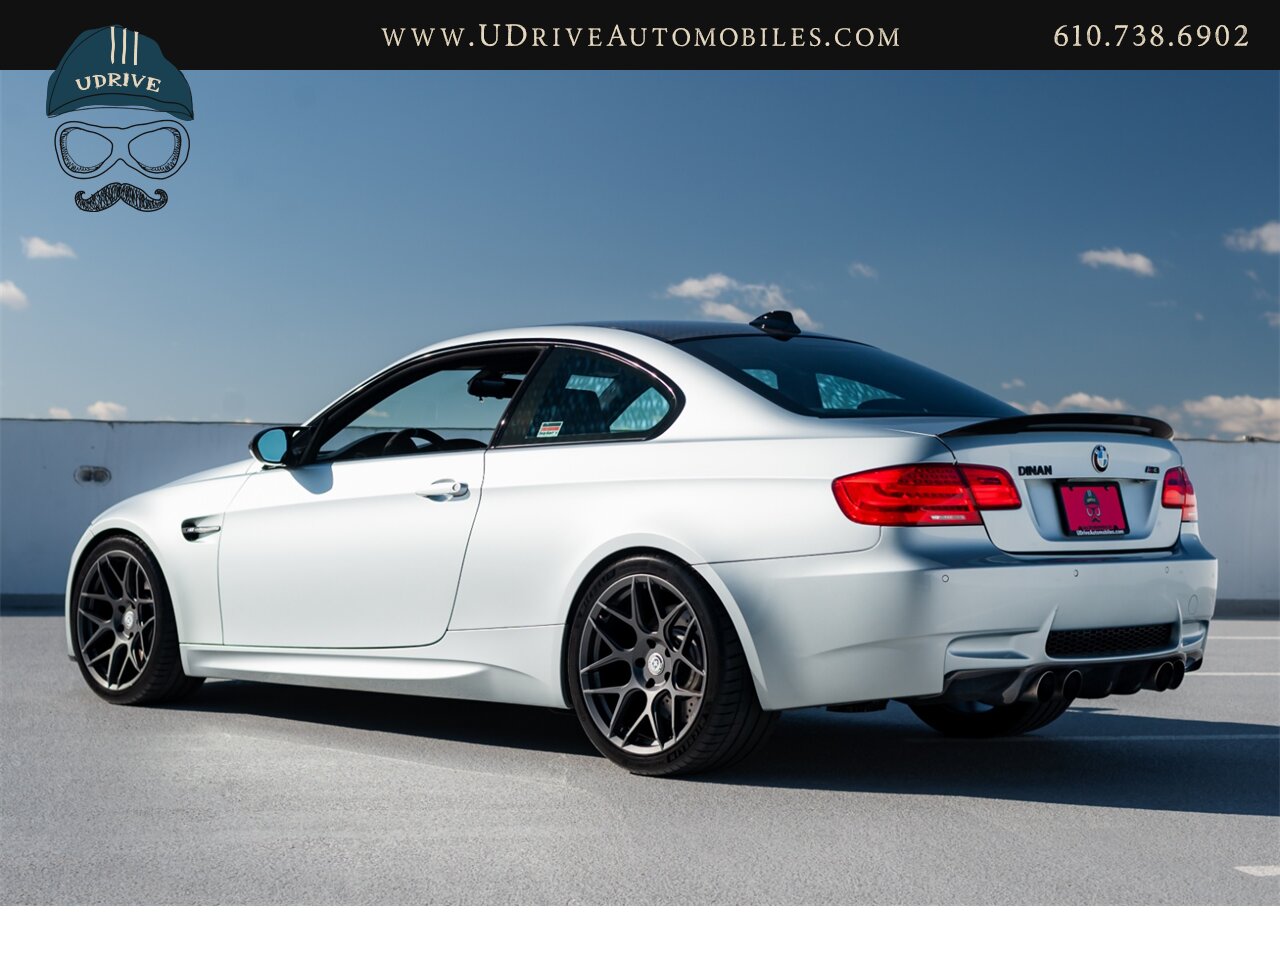 2008 BMW M3 Dinan S3-R M3 1 of 36 Produced DCT  1 Owner Full Service History 4.6L Stroker V8 - Photo 23 - West Chester, PA 19382